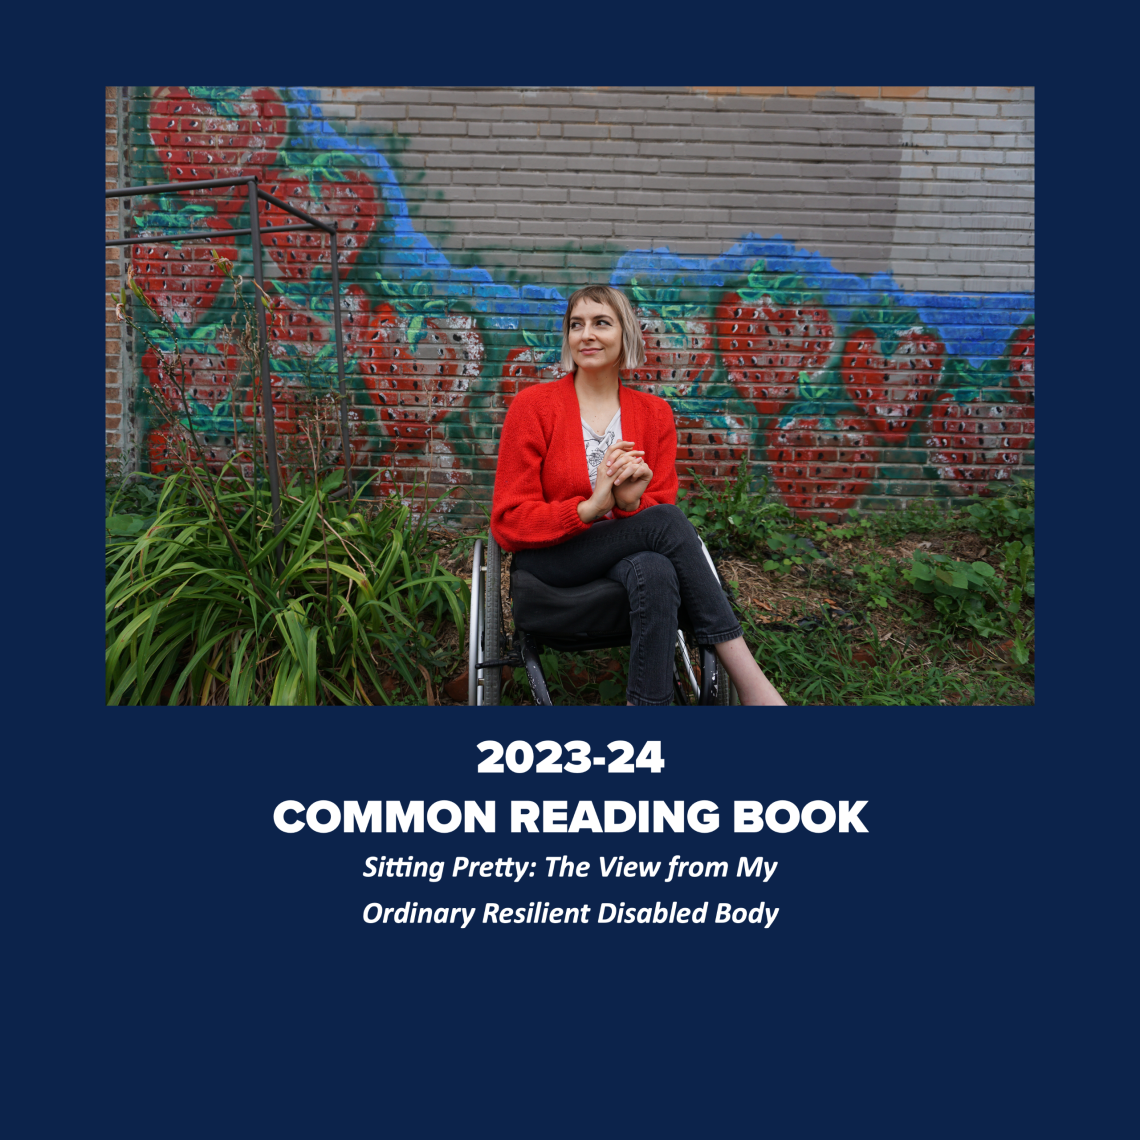 Author of the 2023-24 Common Reading Book Rebekah Taussing